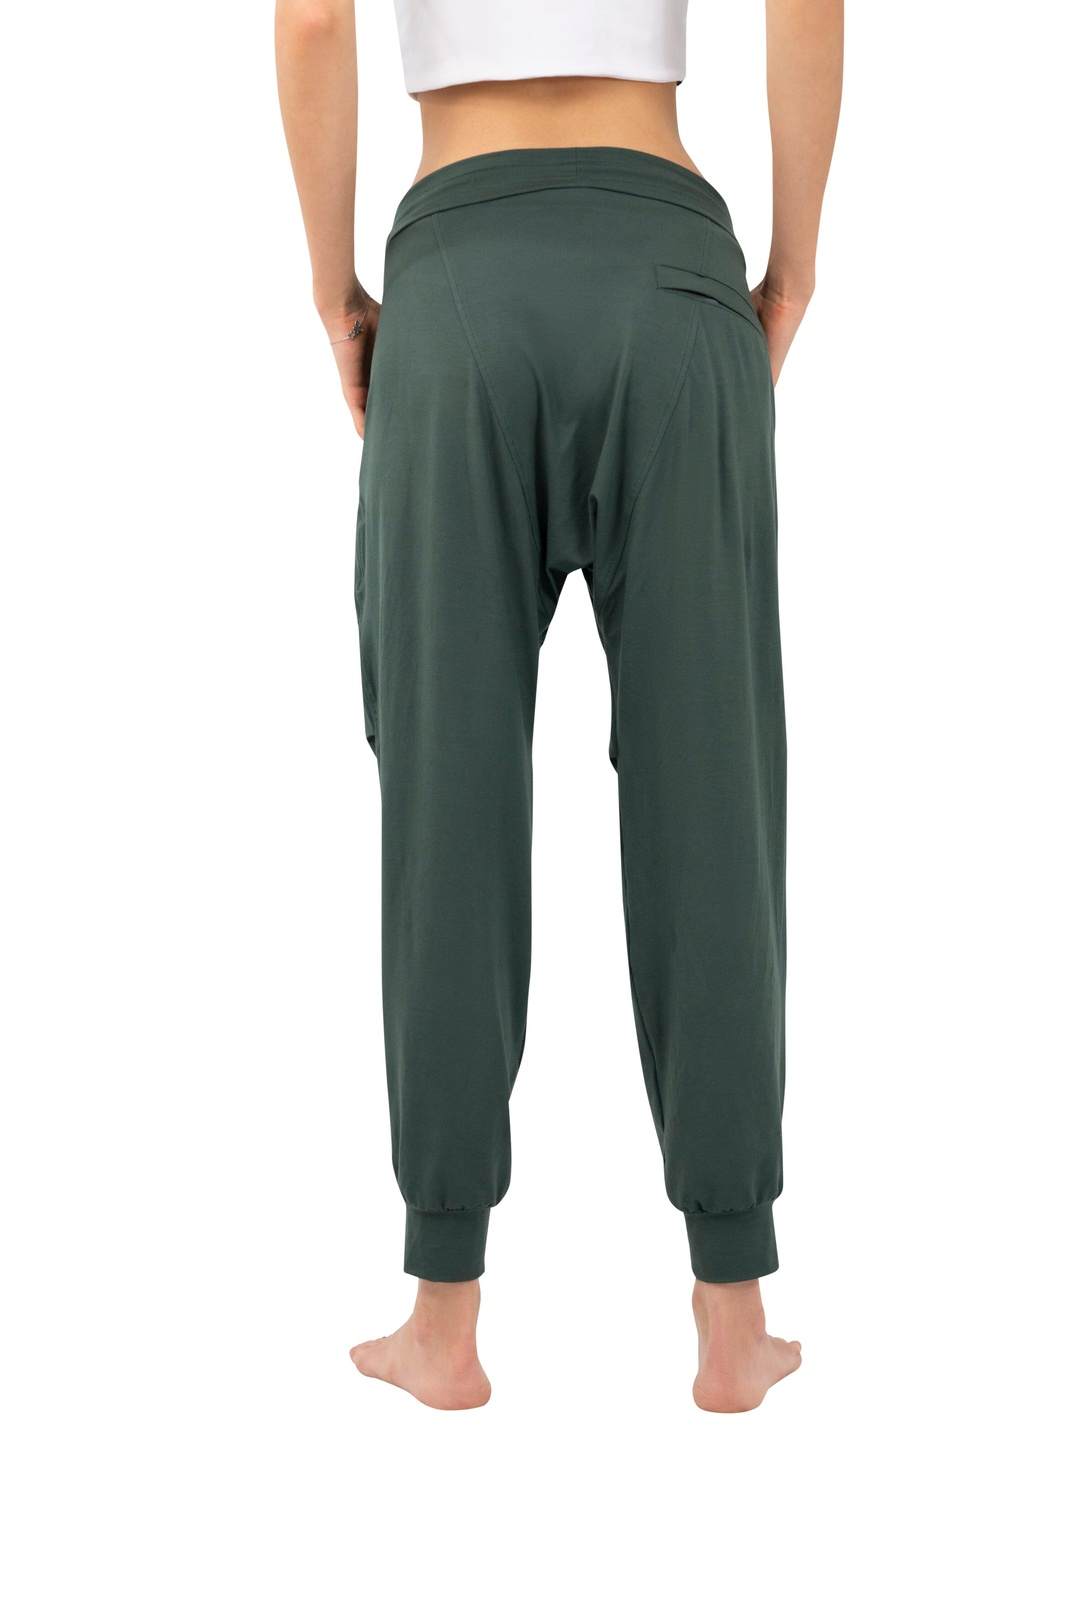 High waisted Harem pants by Ekoluxe sustainable clothing brand